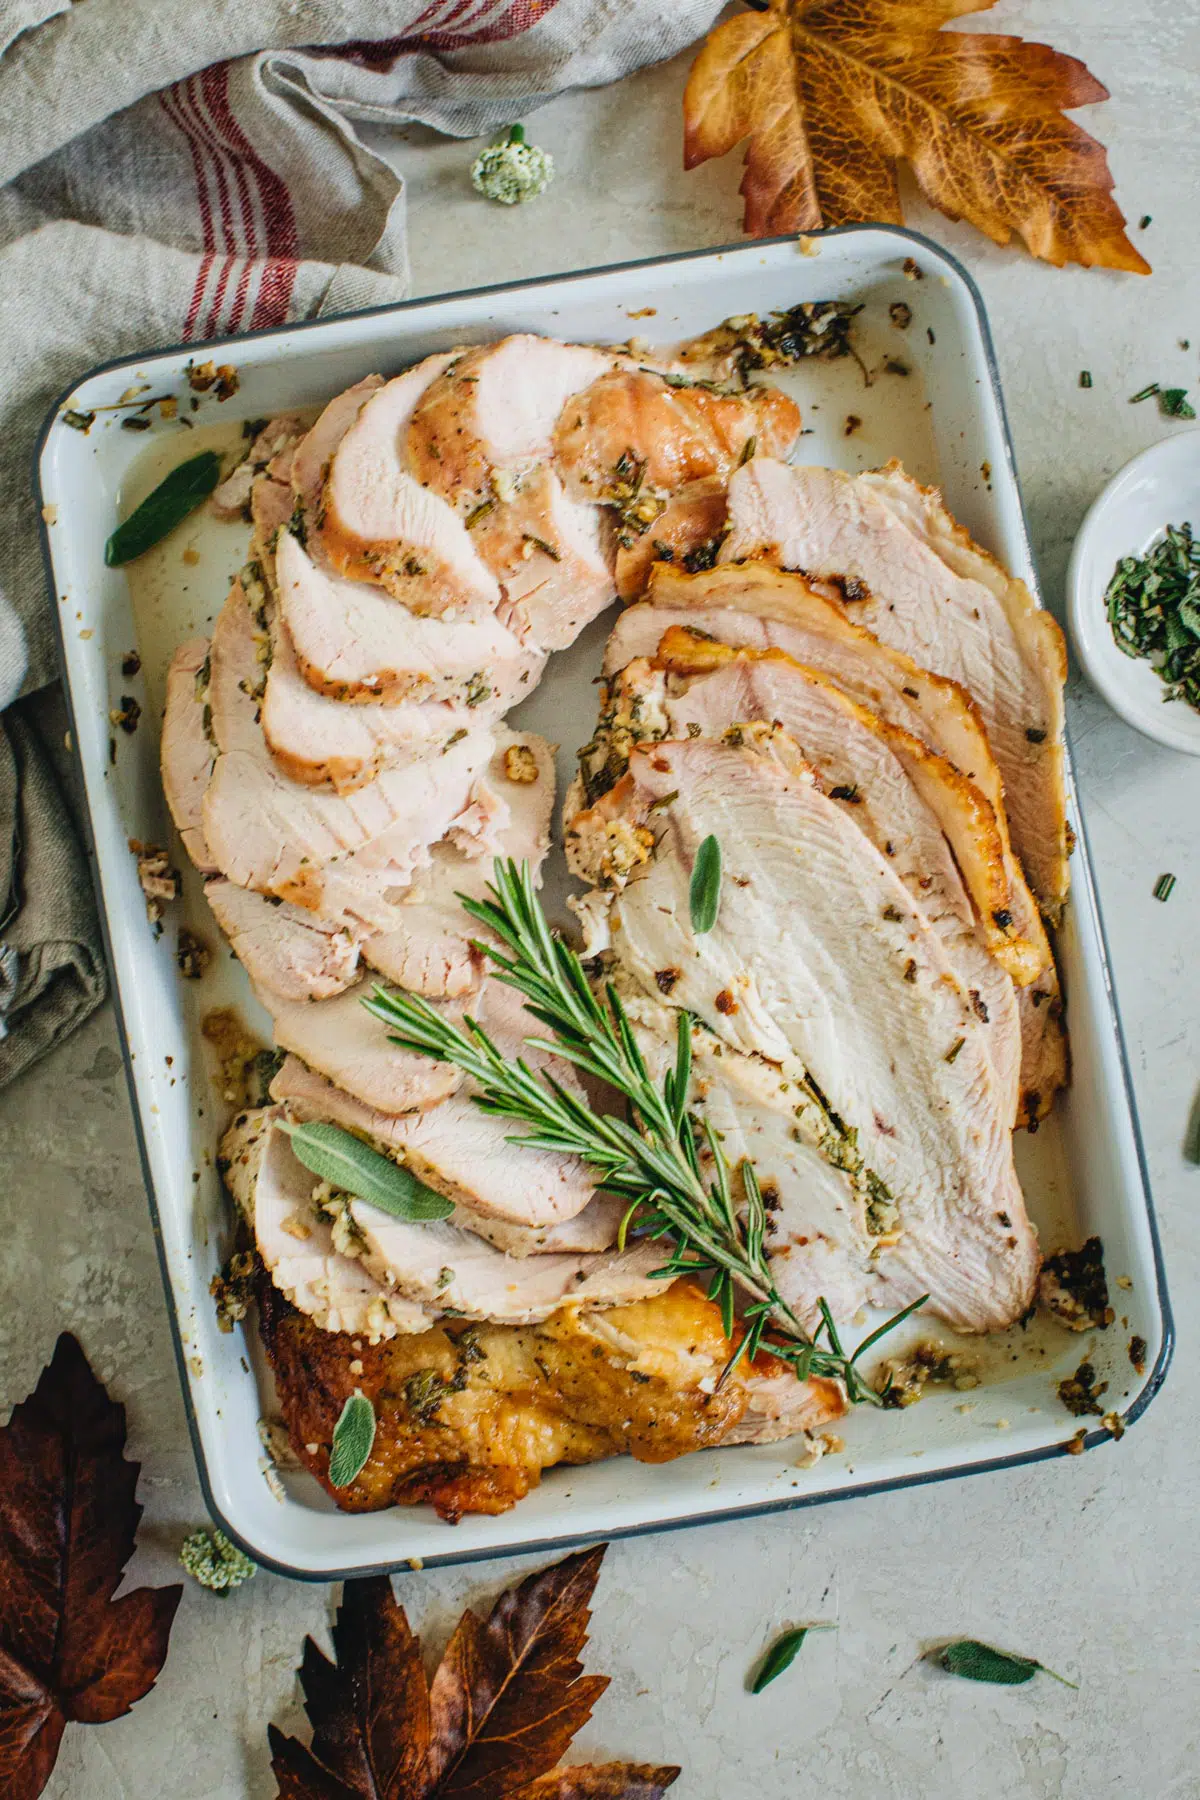 Oven-roasted turkey breast sliced on a rimmed baking sheet and topped with fresh rosemary and sage.